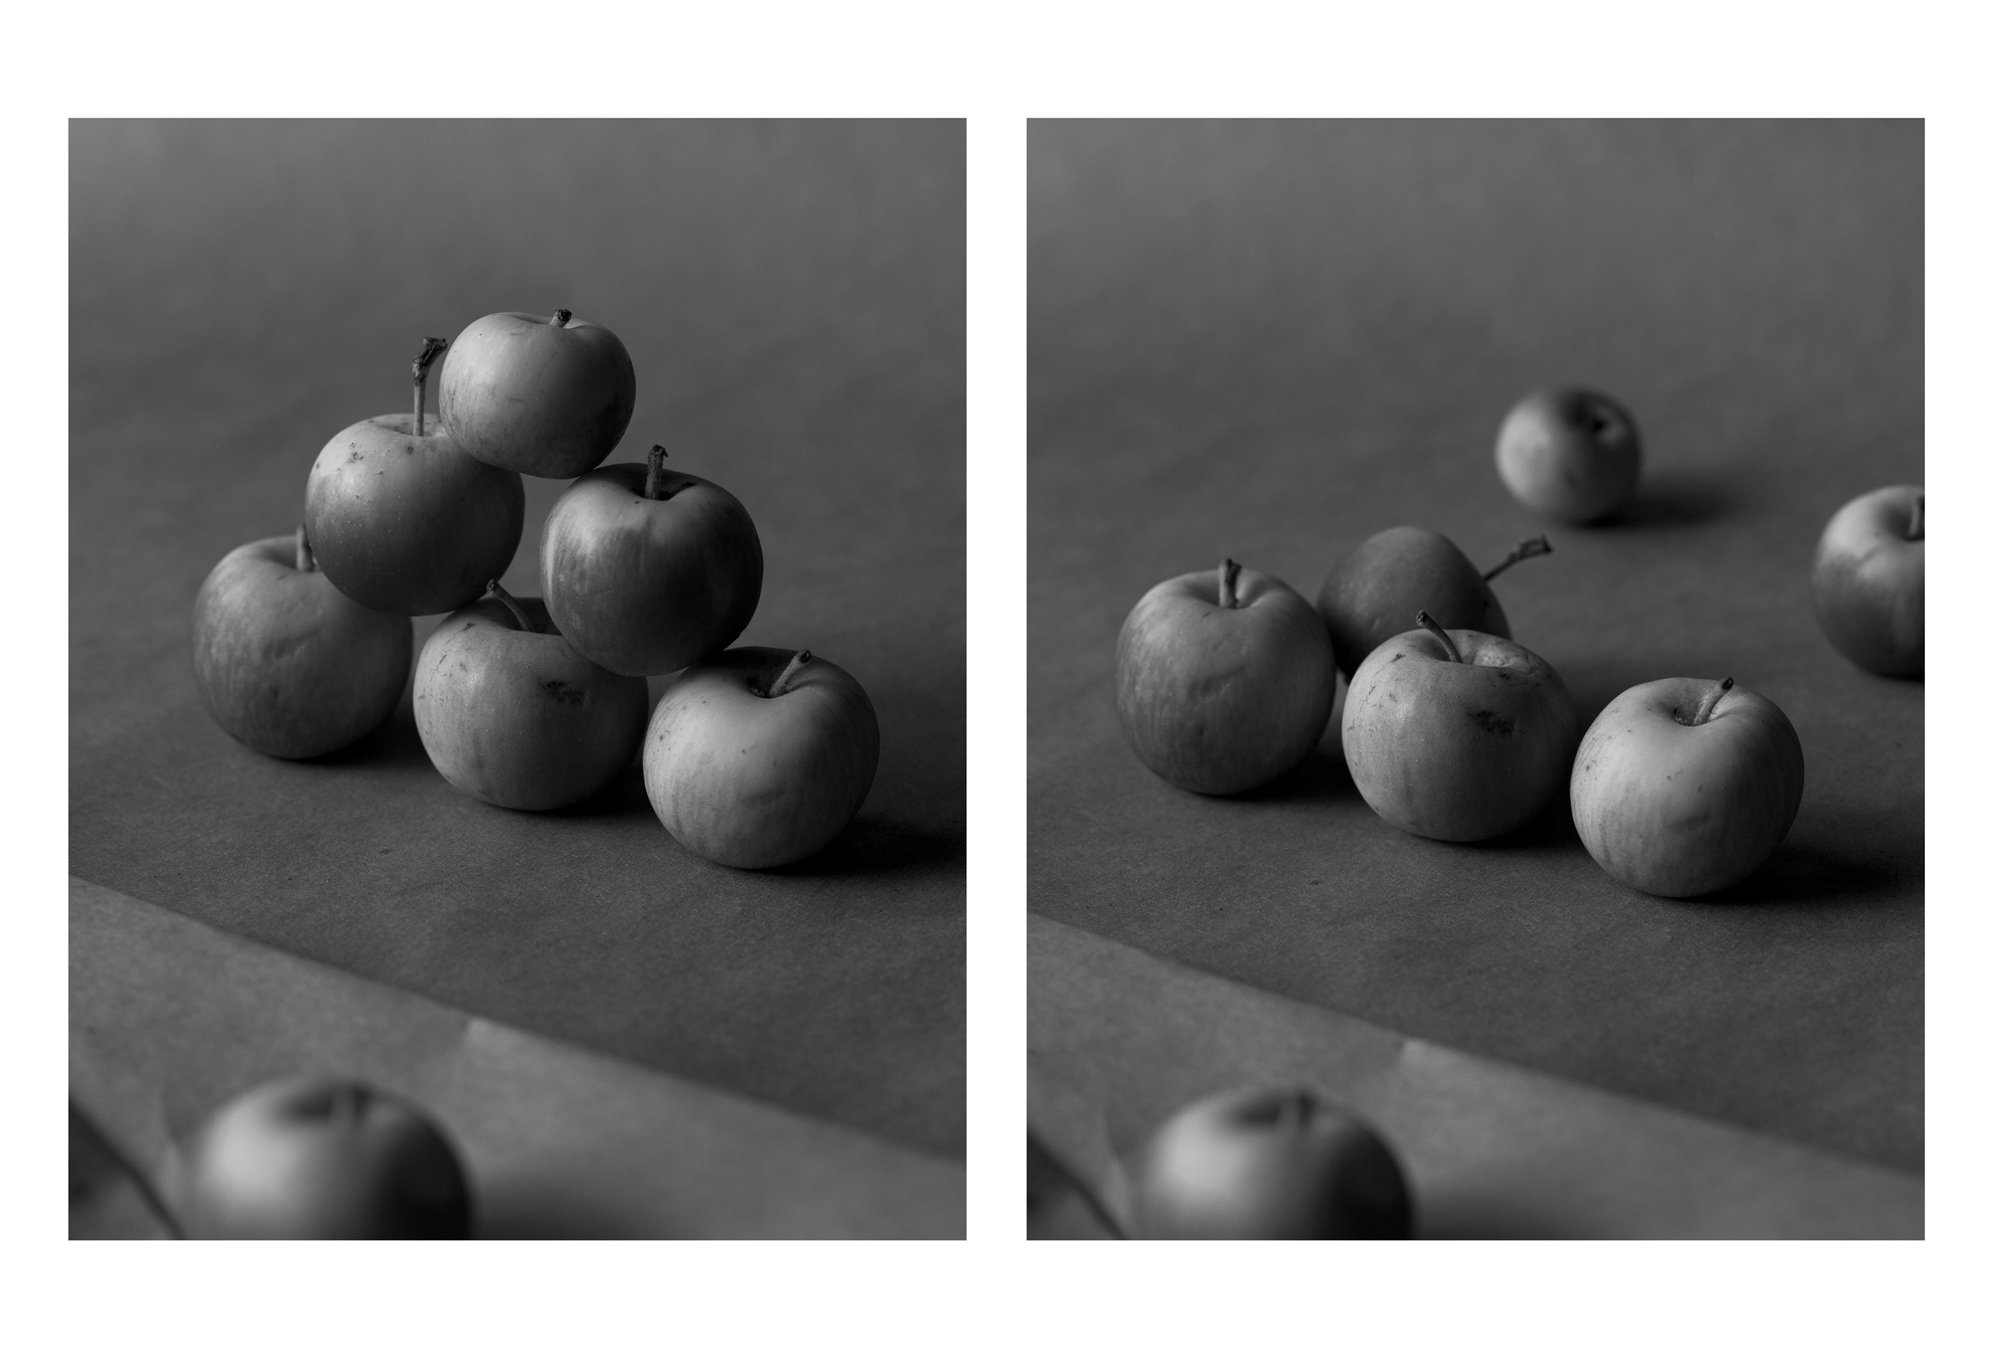 2018-01-25_5a69804d7d05e_aysia-stieb-foot-tap-jaw-jerk-apples-stack-diptych-photograph-02